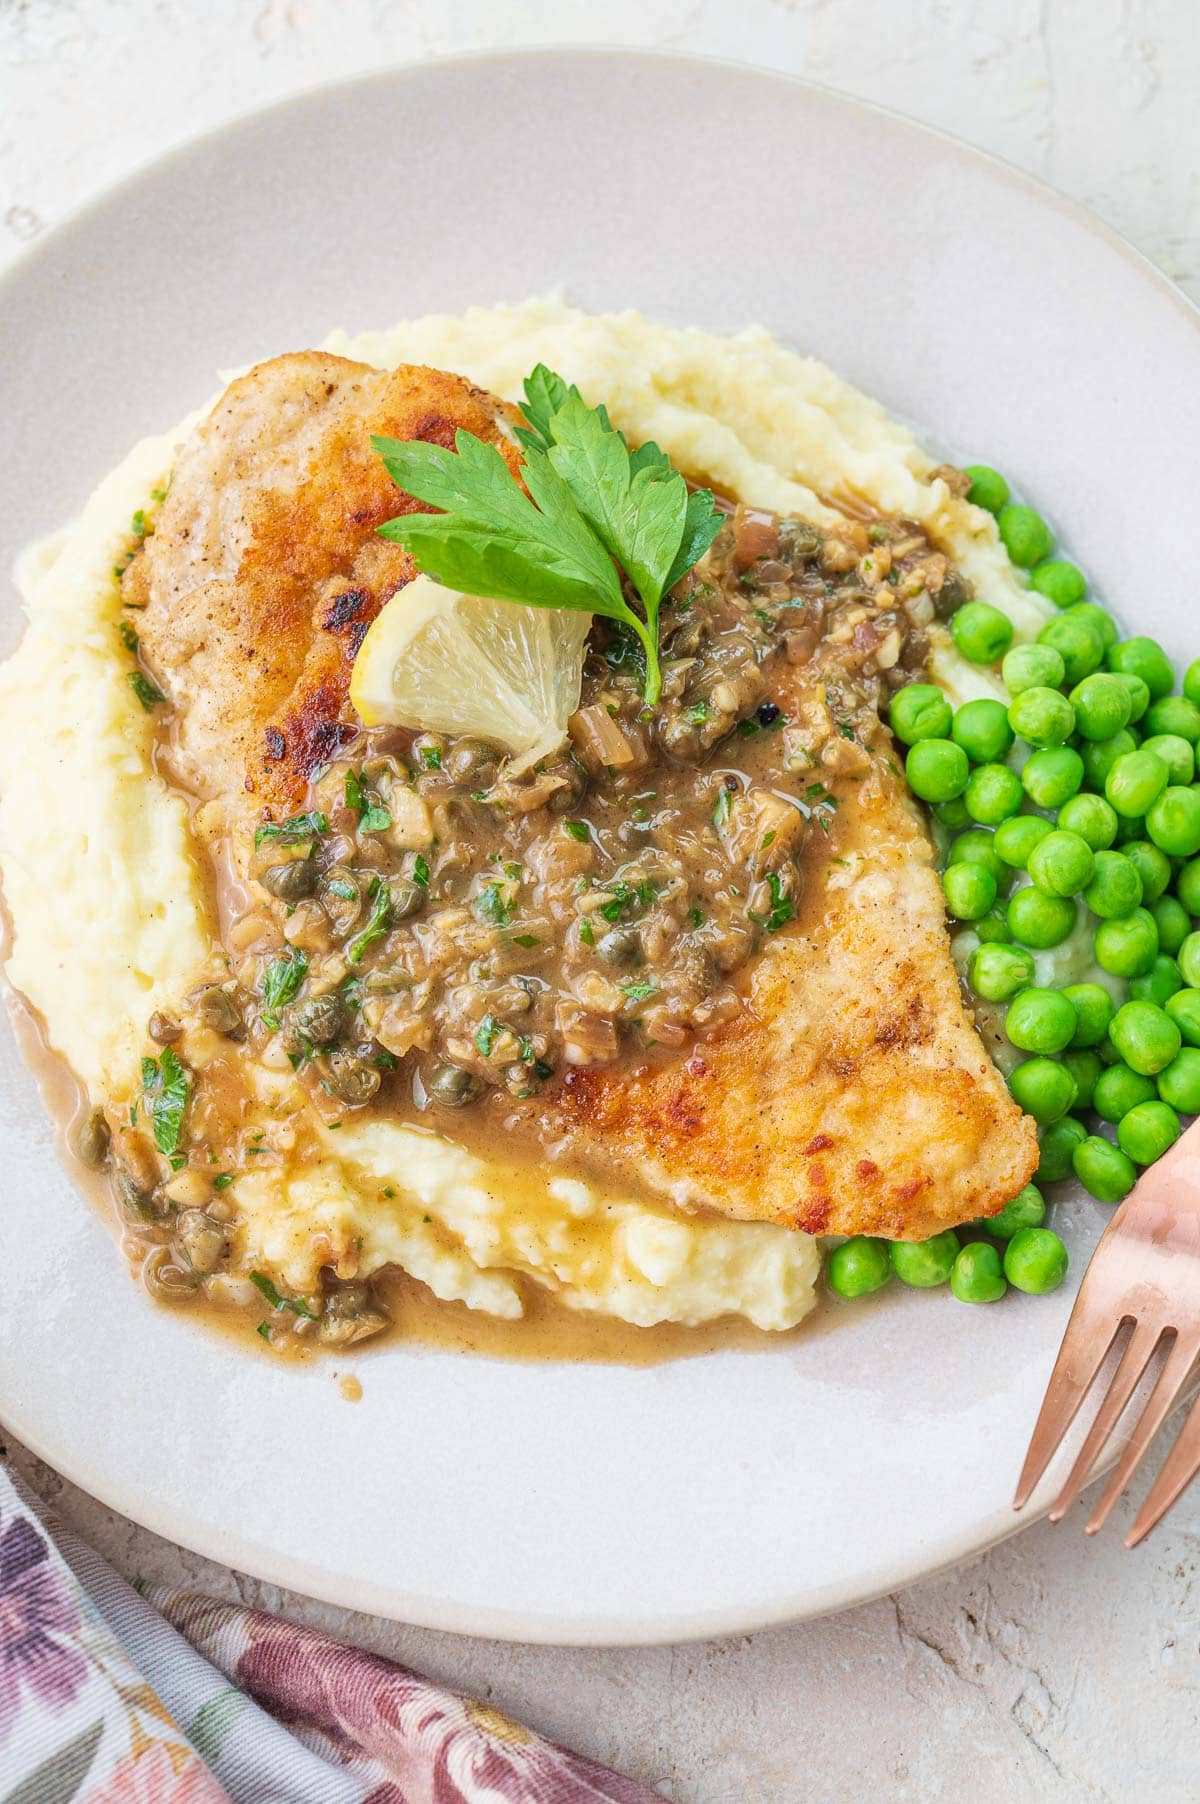 Chicken piccata with mashed potatoes and peas on a plate.